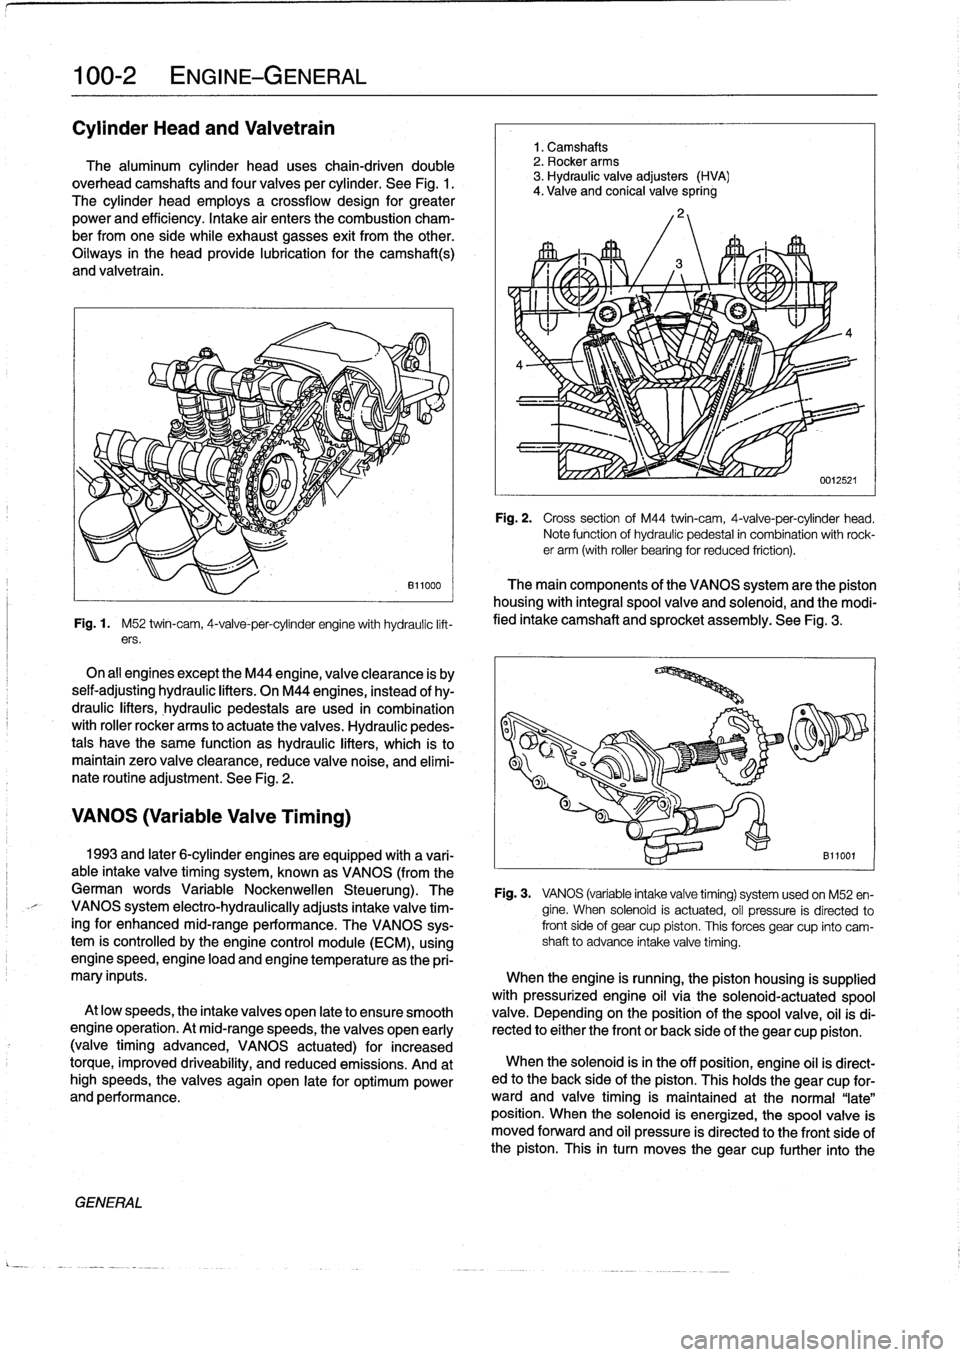 BMW 325i 1992 E36 Workshop Manual 
100-2
ENGINE-GENERAL

Cylinder
Head
and
Valvetrain

The
aluminum
cylinder
head
uses
chain-driven
double
overhead
camshafts
and
four
valves
per
cylinder
.
See
Fig
.
1
.

The
cylinder
head
employs
a
cr